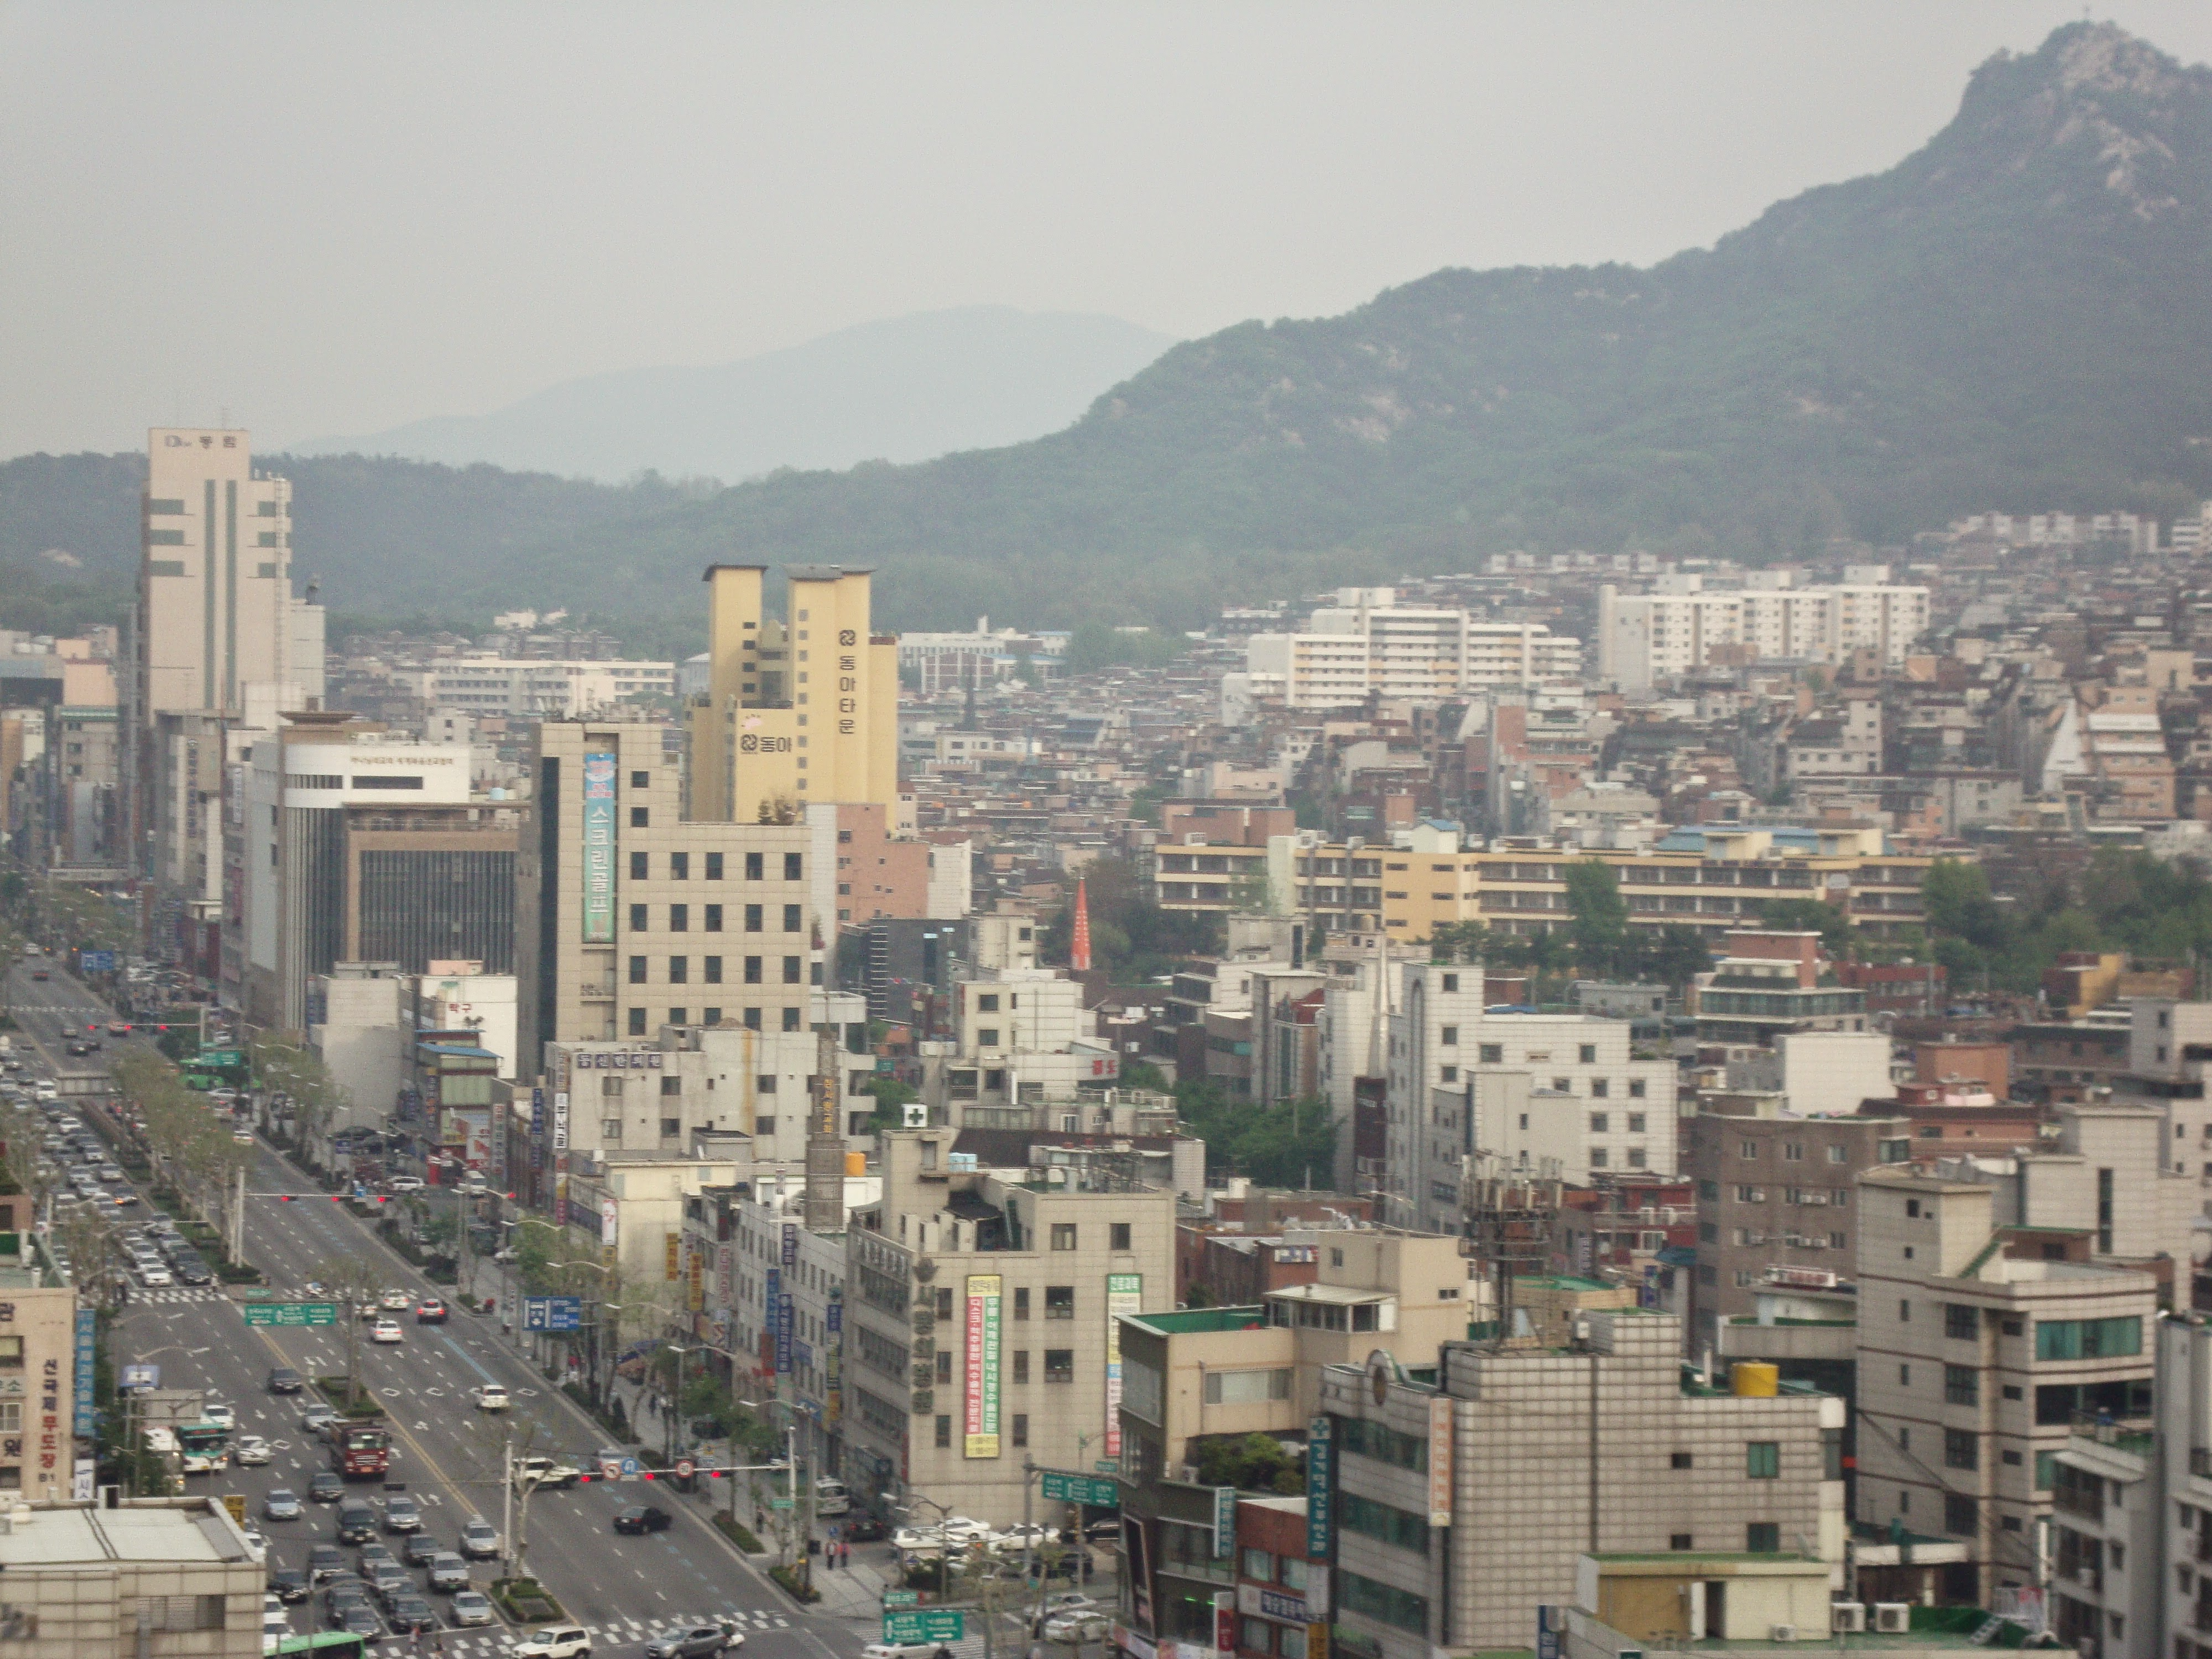 From the roof of the author's apartment building near Seoul National University station, a picture taken in early evening looking southeast on Seoul's sprawl of high rise aparments, businesses lining the roads, and mountains in the distance.